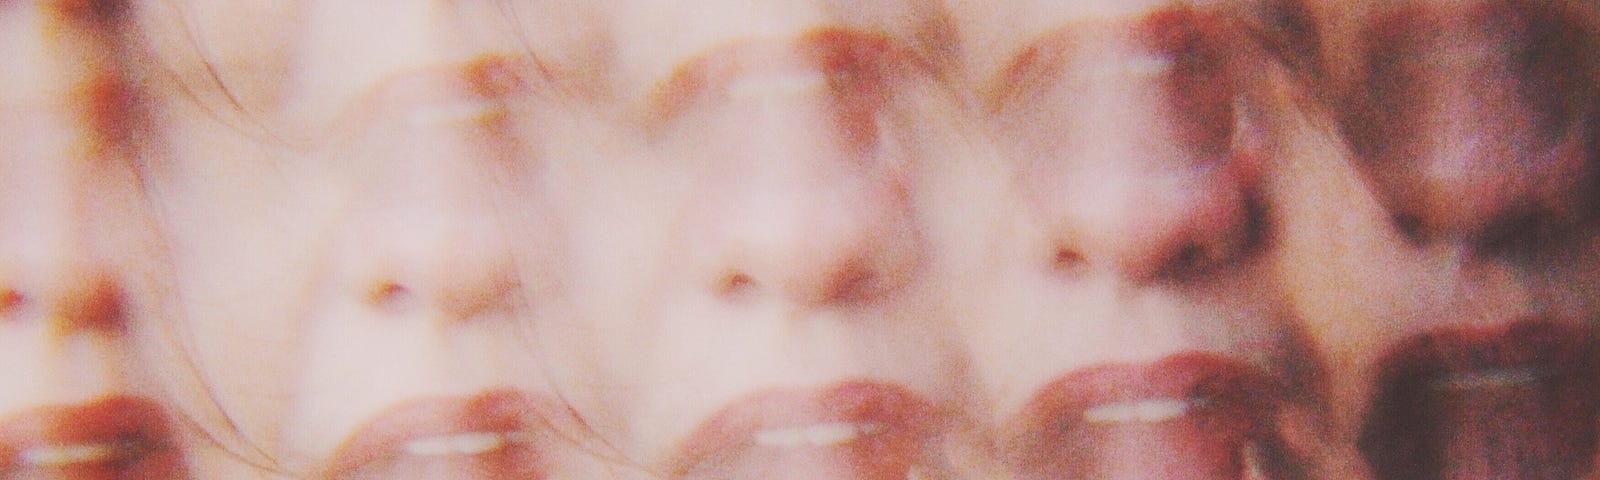 A composite image of a woman with her mouth open.